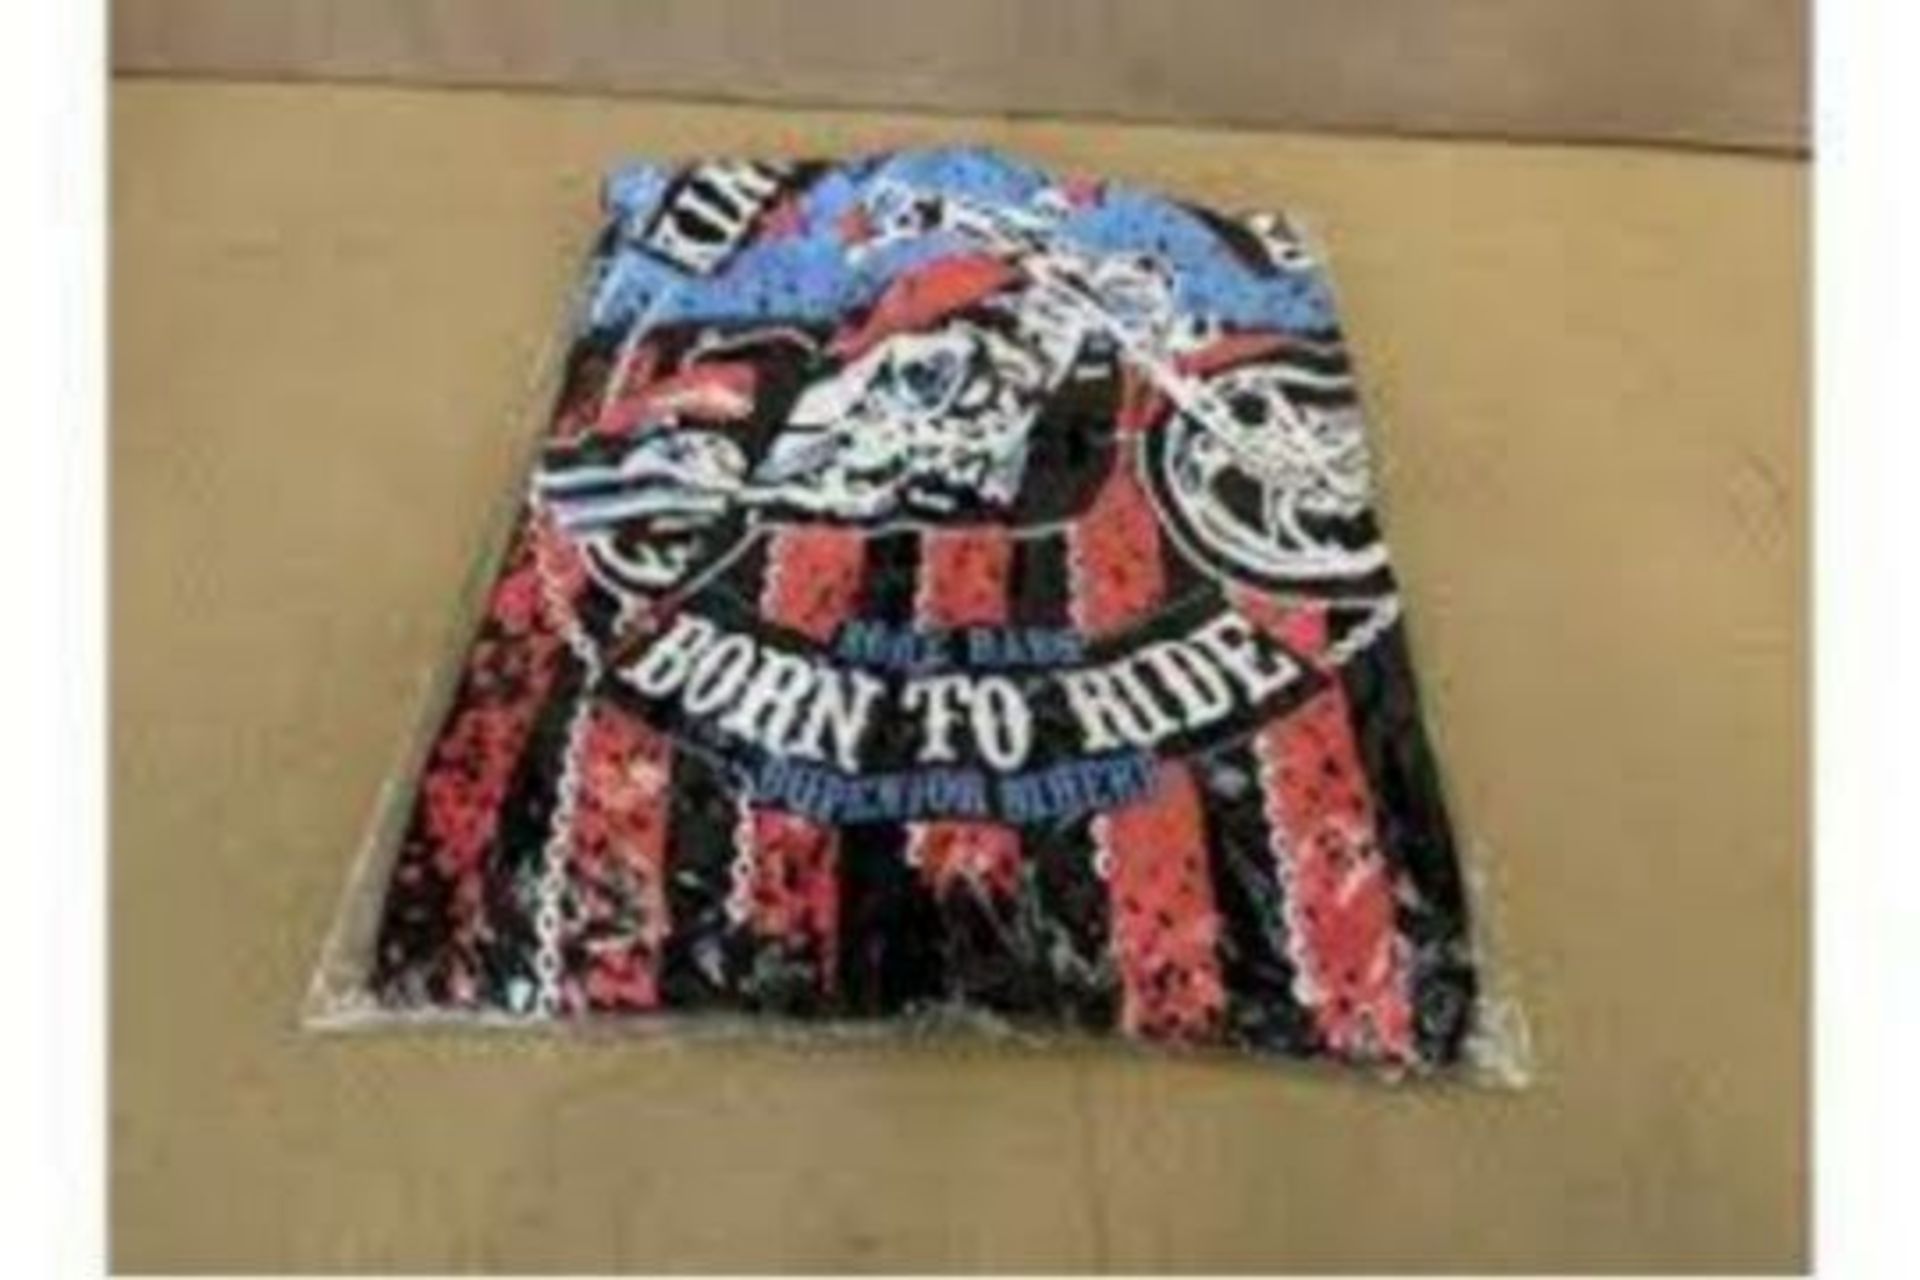 10 X BRAND NEW BORN TO RIDE ROCK DRESSES IN VARIOUS SIZES S1P